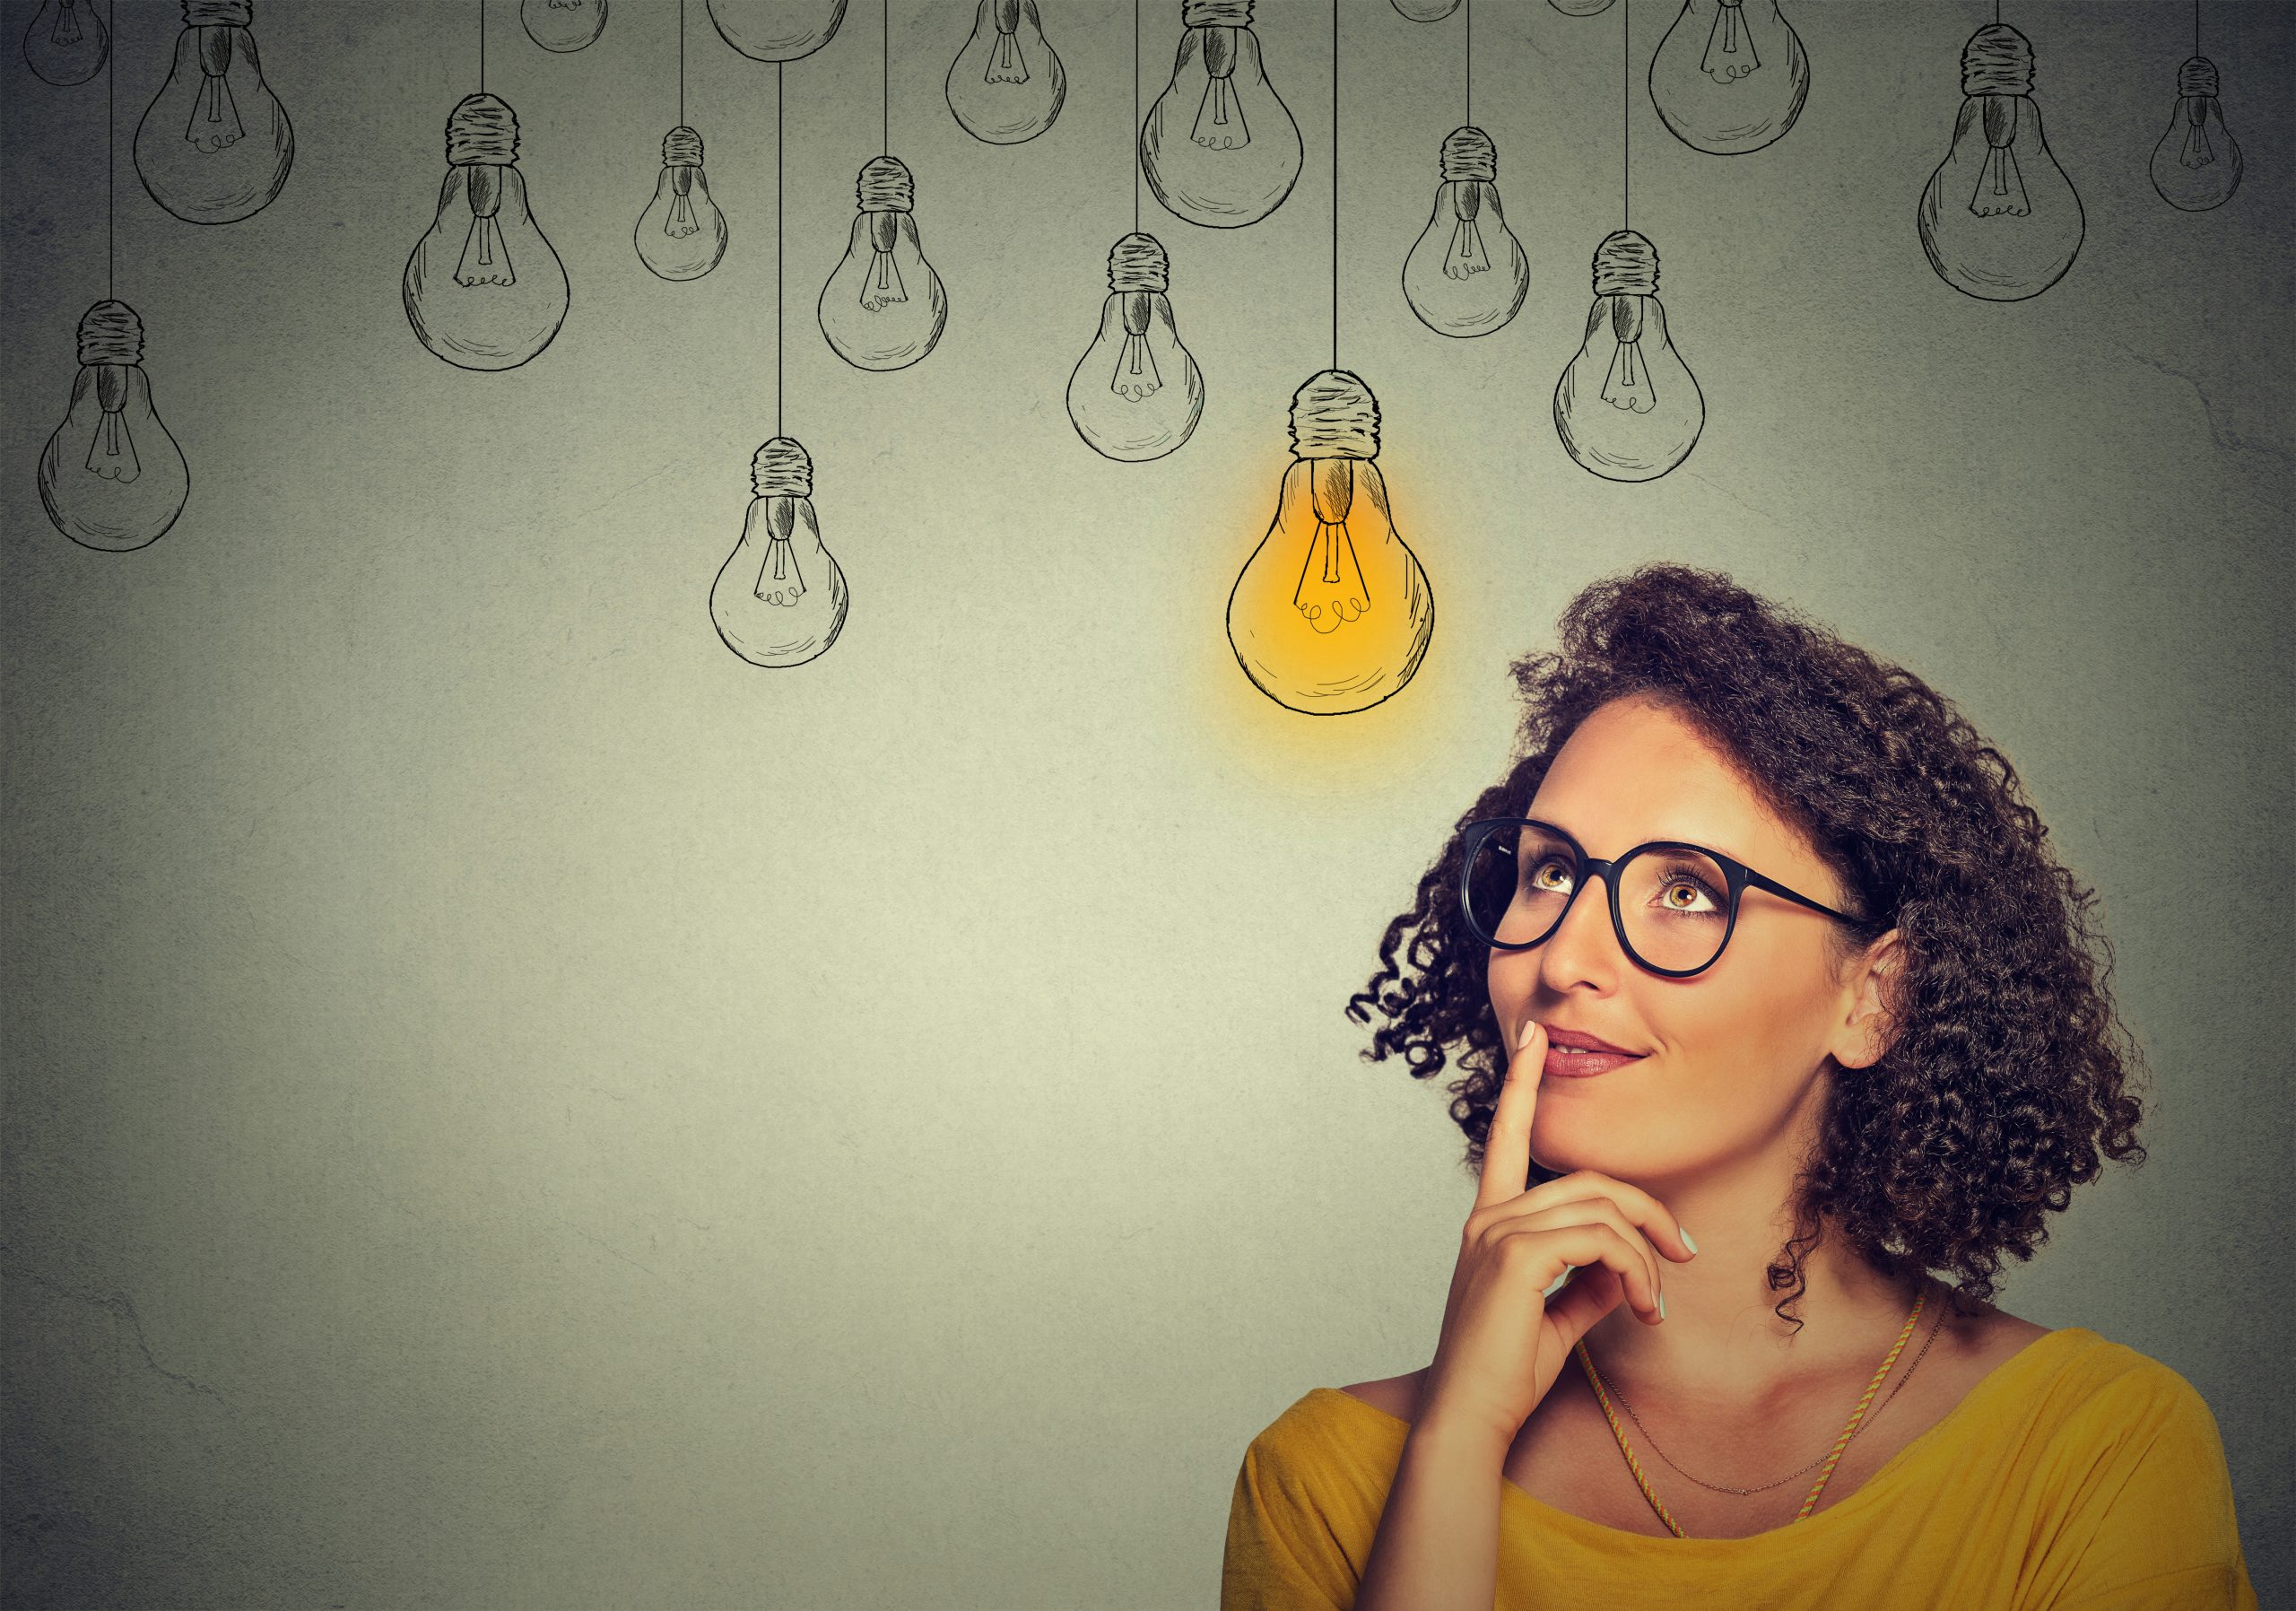 woman thinking with lightbulb above her head